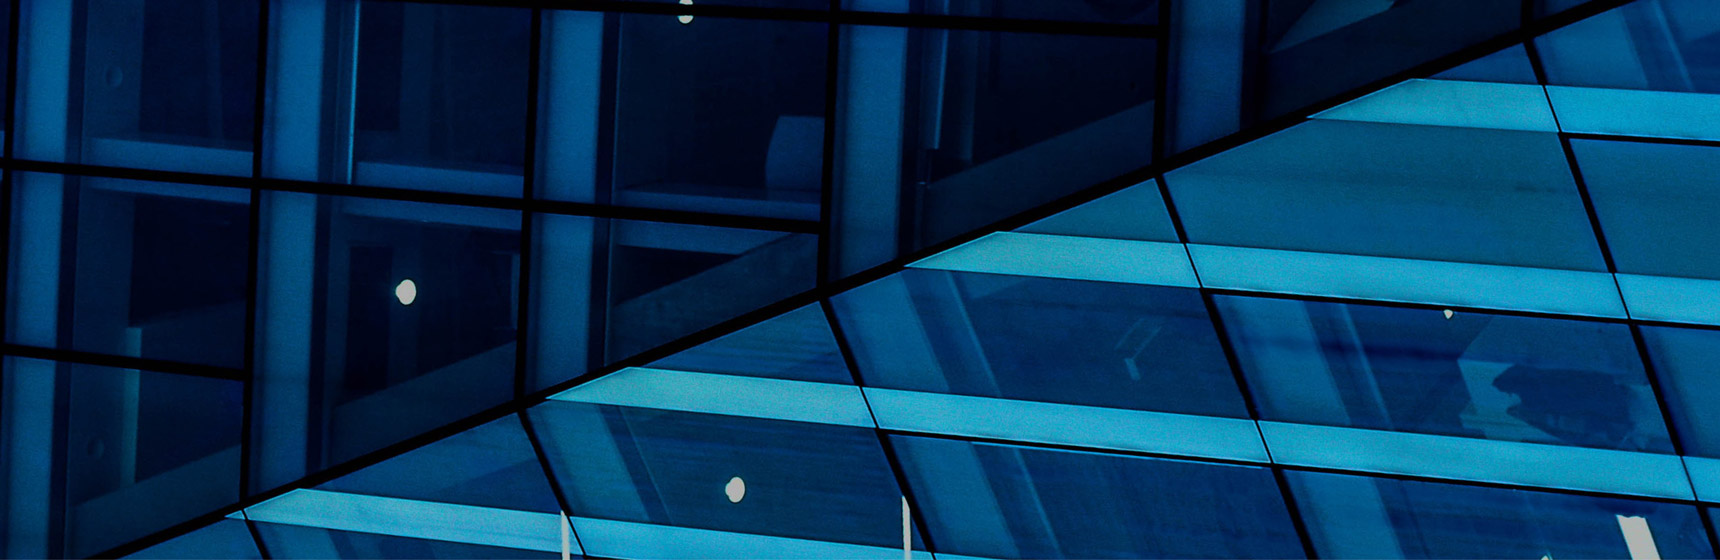 Abstract view of building, blue